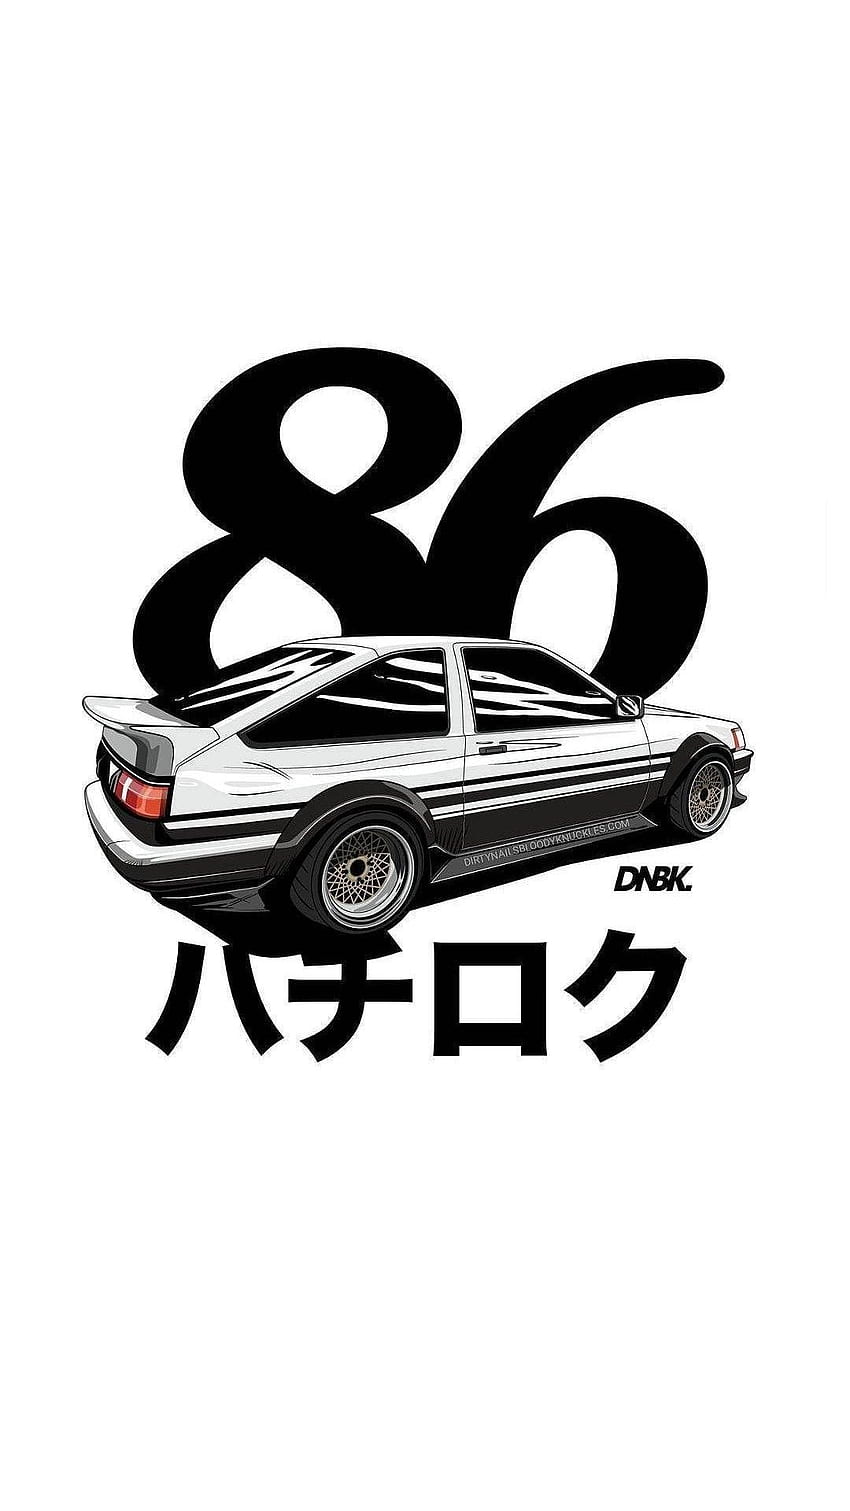 Guest Article: What's it like to drive and own a Toyota AE86? From Jor –  Drift Indy